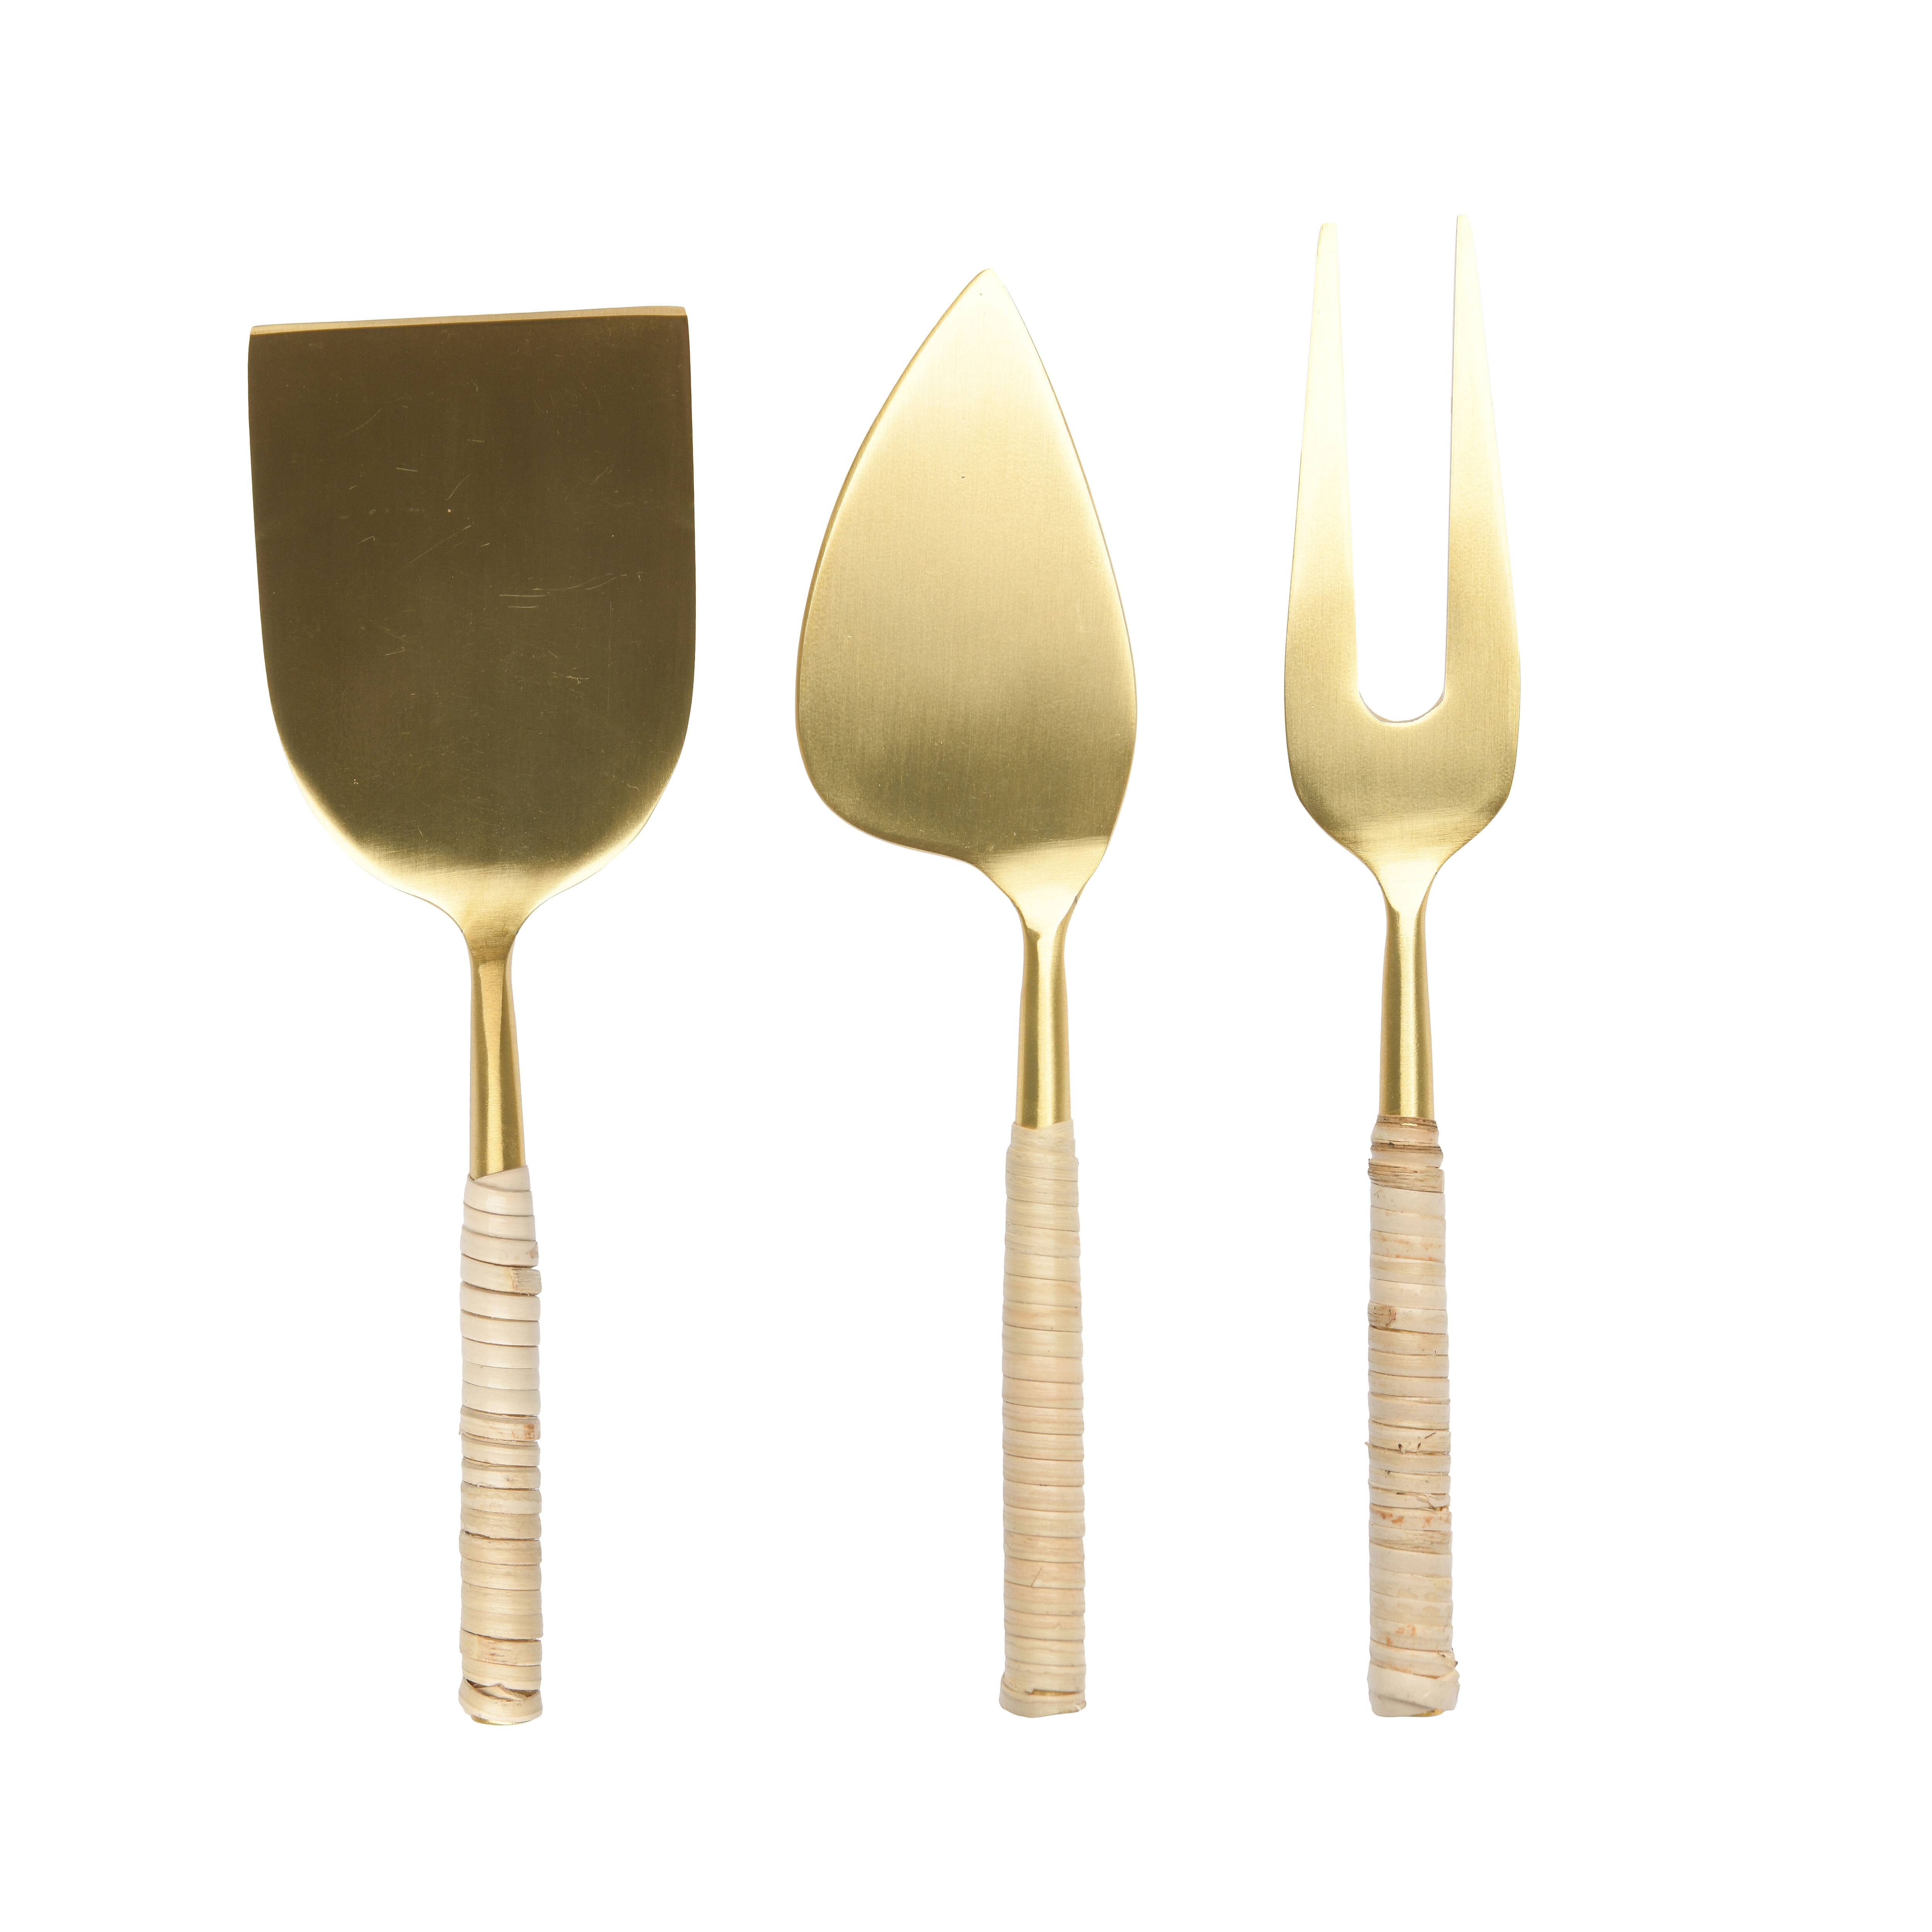 Gold Stainless Steel Cheese Servers with Woven Rattan Handles Set